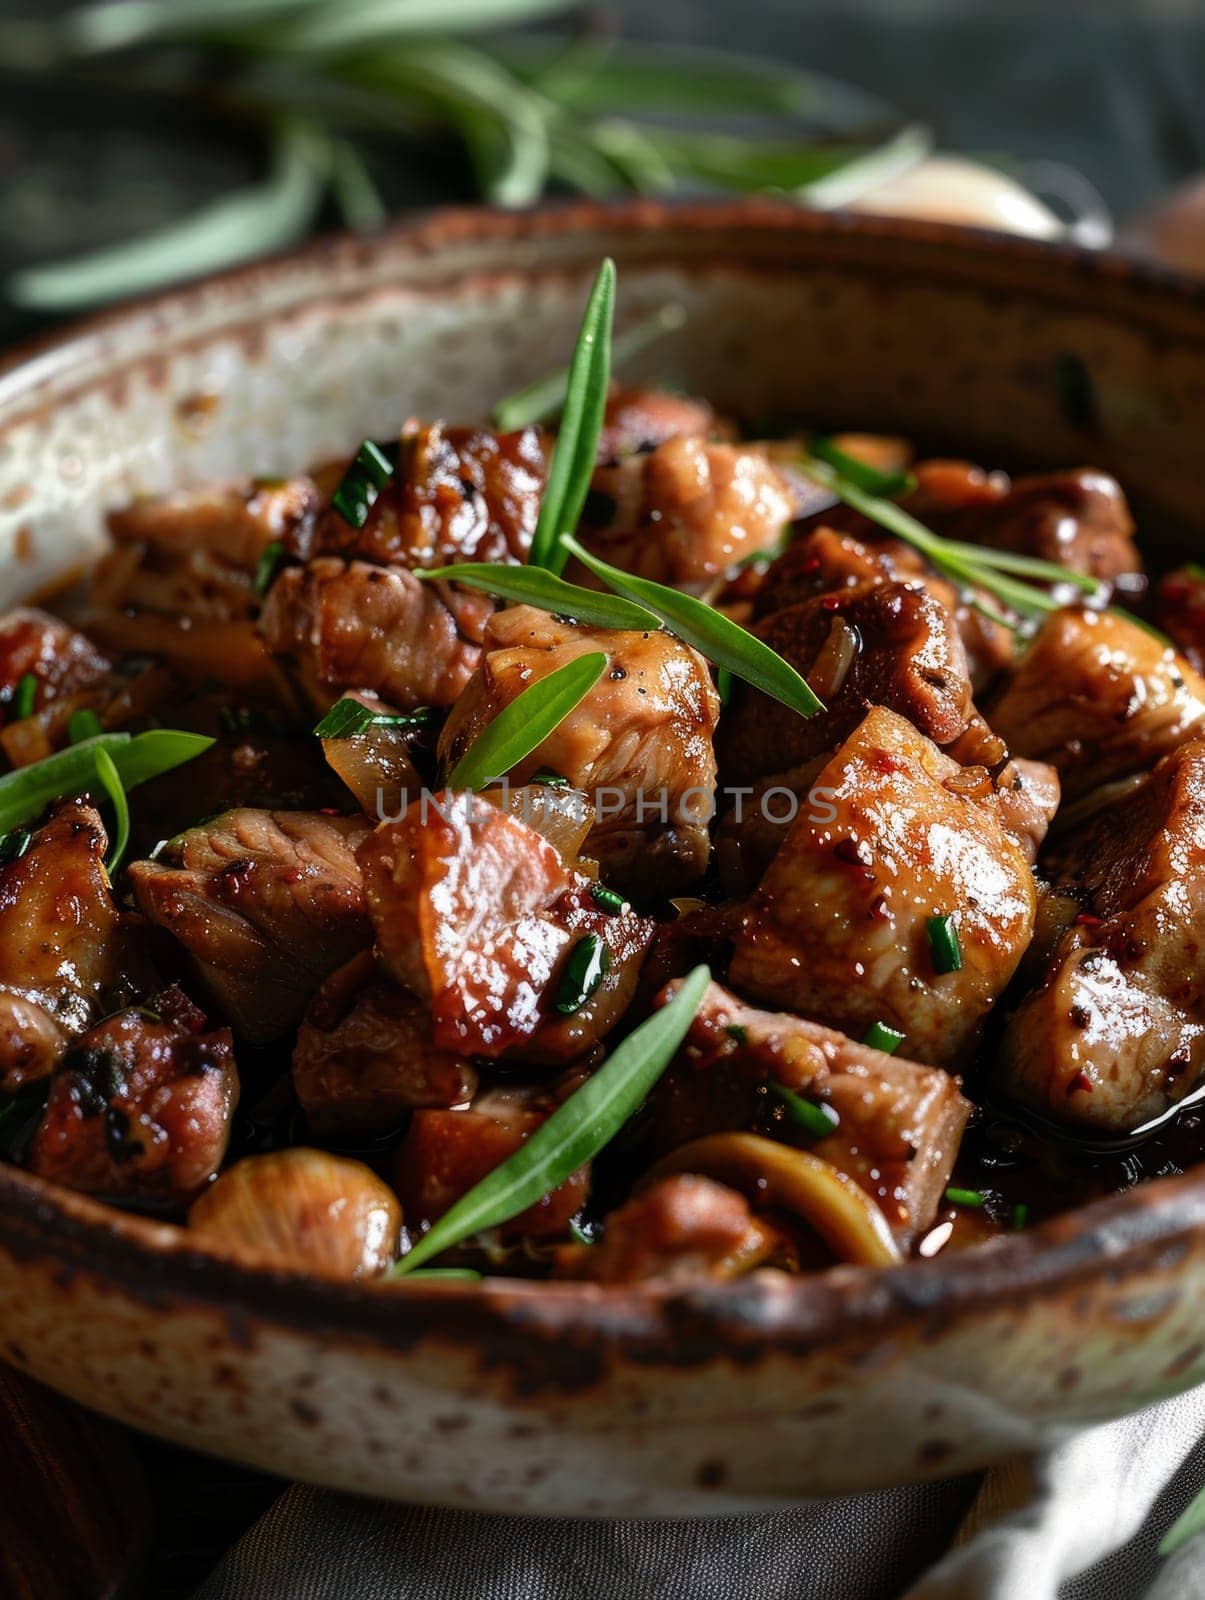 Authentic Filipino adobo, featuring chicken and pork simmered in a savory blend of soy sauce, vinegar, and garlic - a comforting, flavorful dish that captures the essence of Filipino cuisine. by sfinks